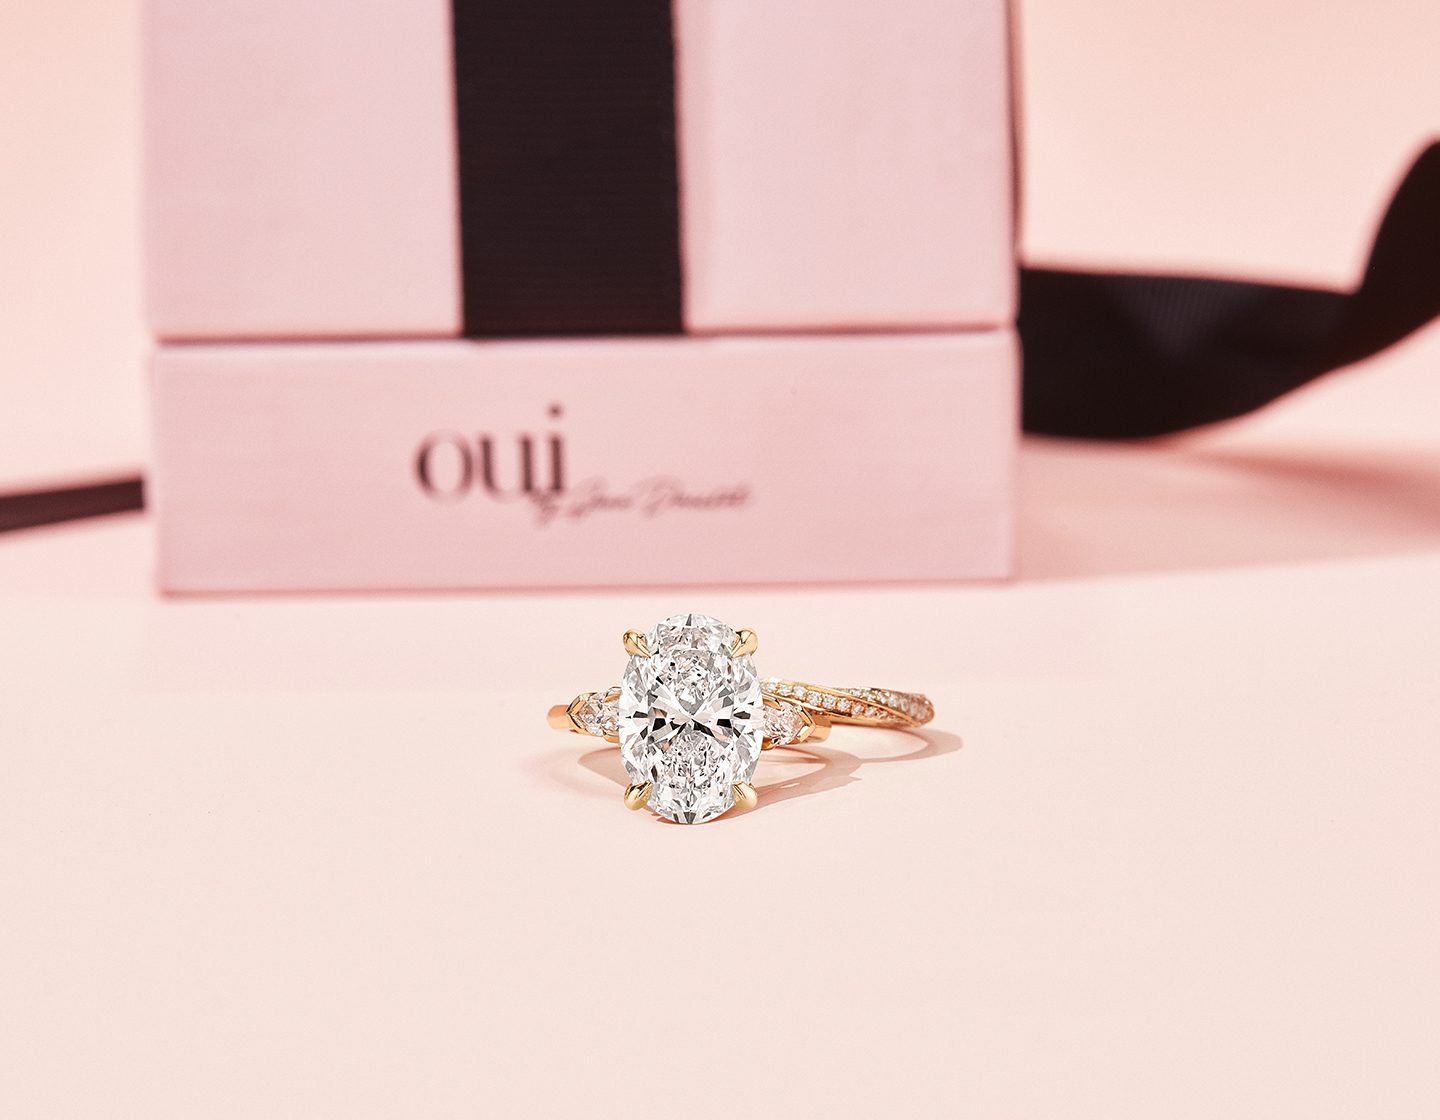 Oui by Jean Dousset Engagement Ring and Band Set with Packaging